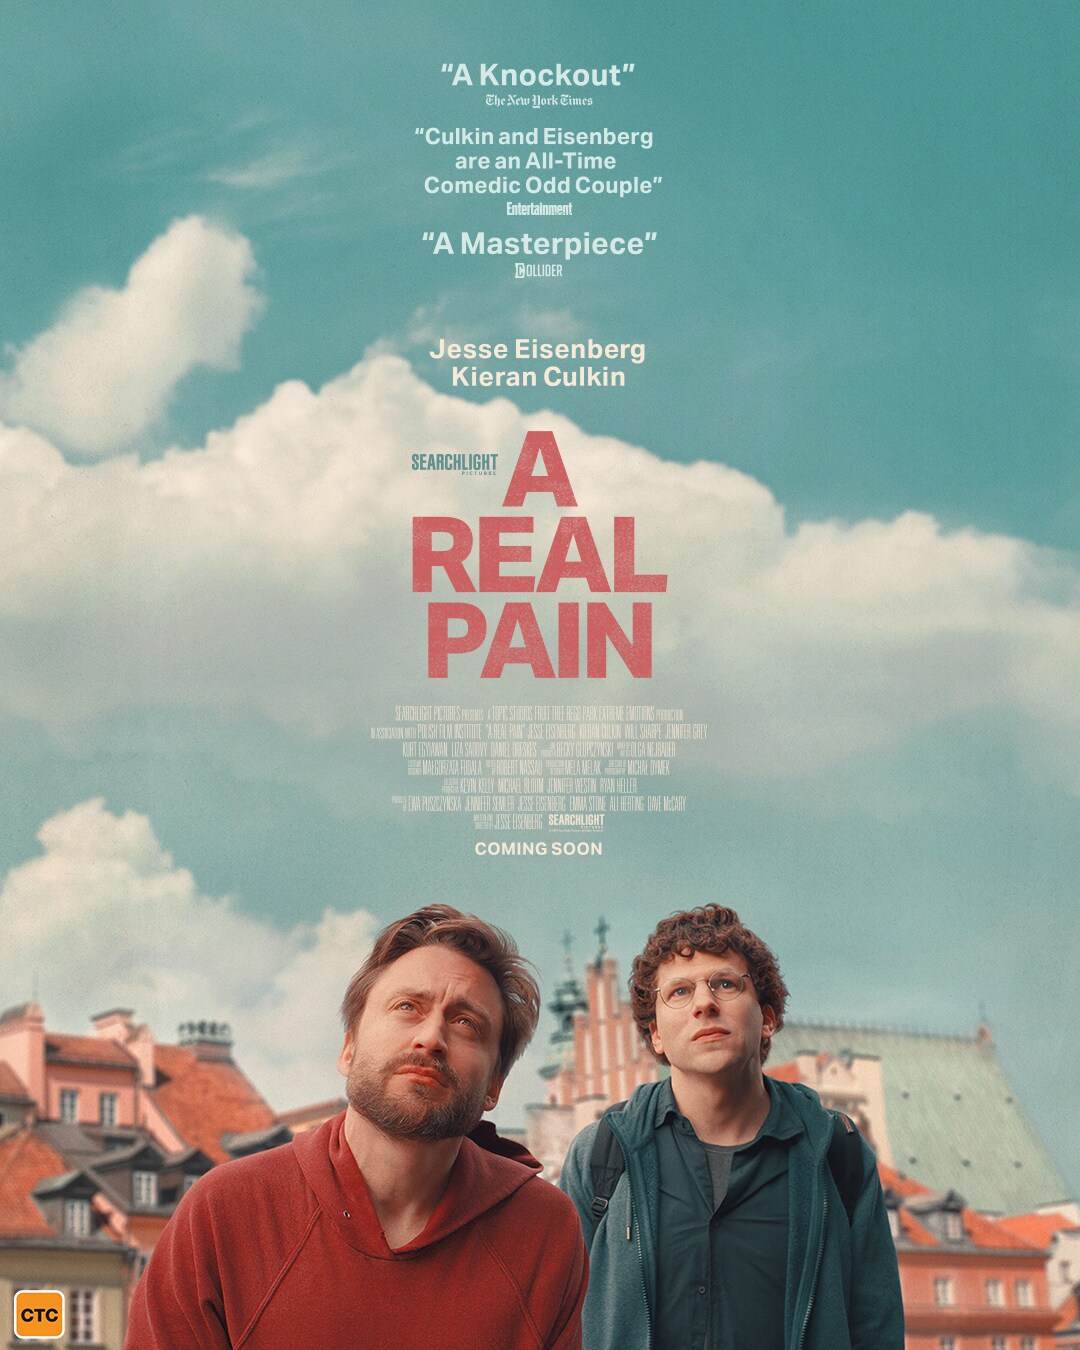 The official poster for the movie A Real Pain